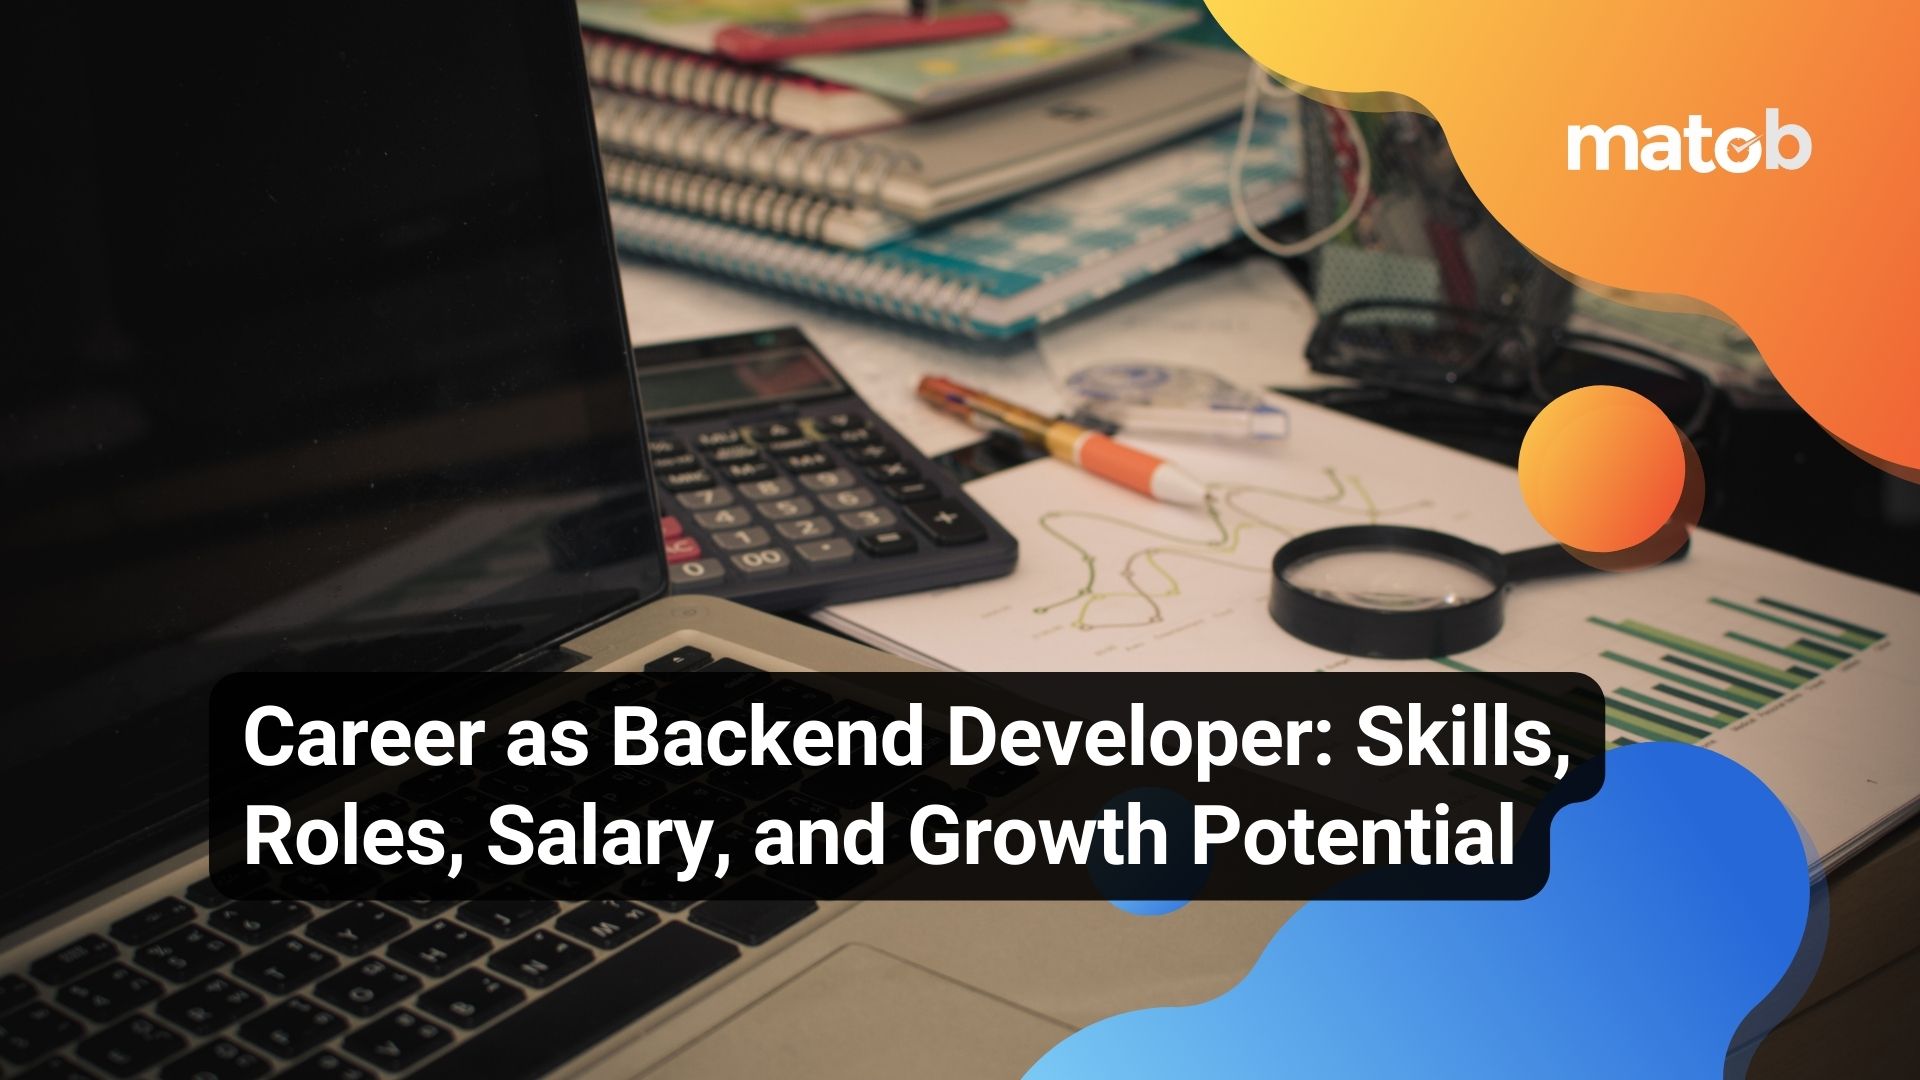 Career as Backend Developer: Skills, Roles, Salary, and Growth Potential